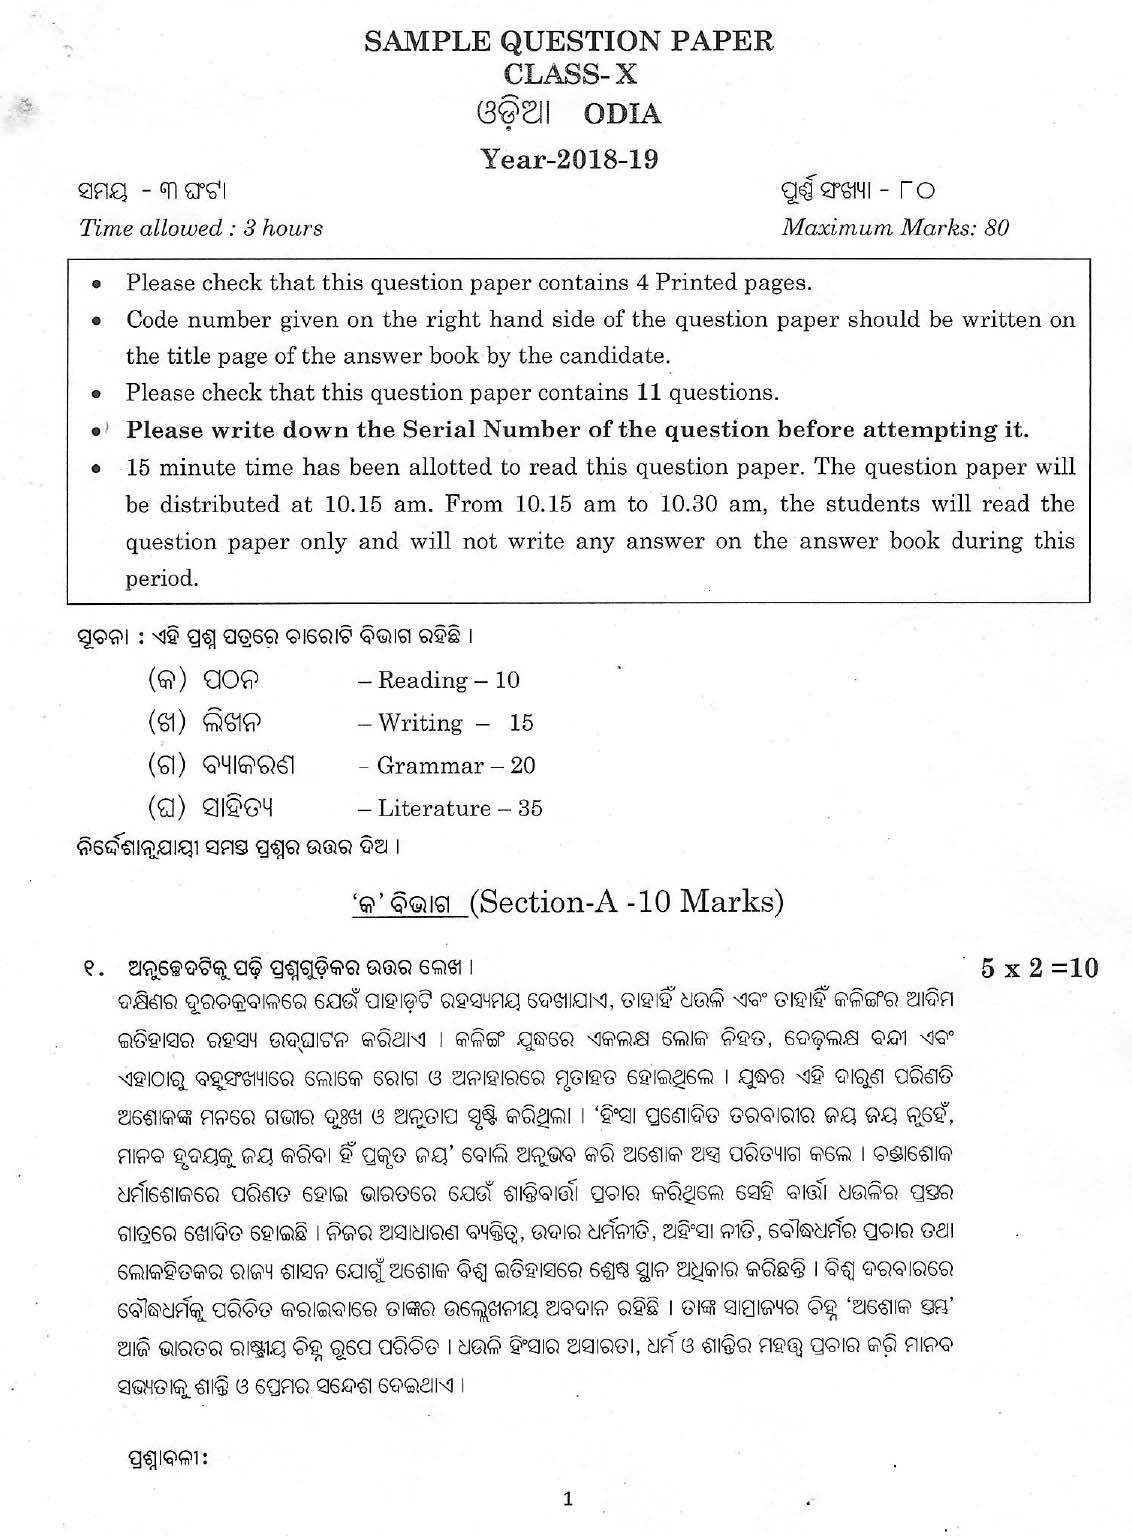 Odia CBSE Class X Sample Question Paper 2018-19 - Image 1